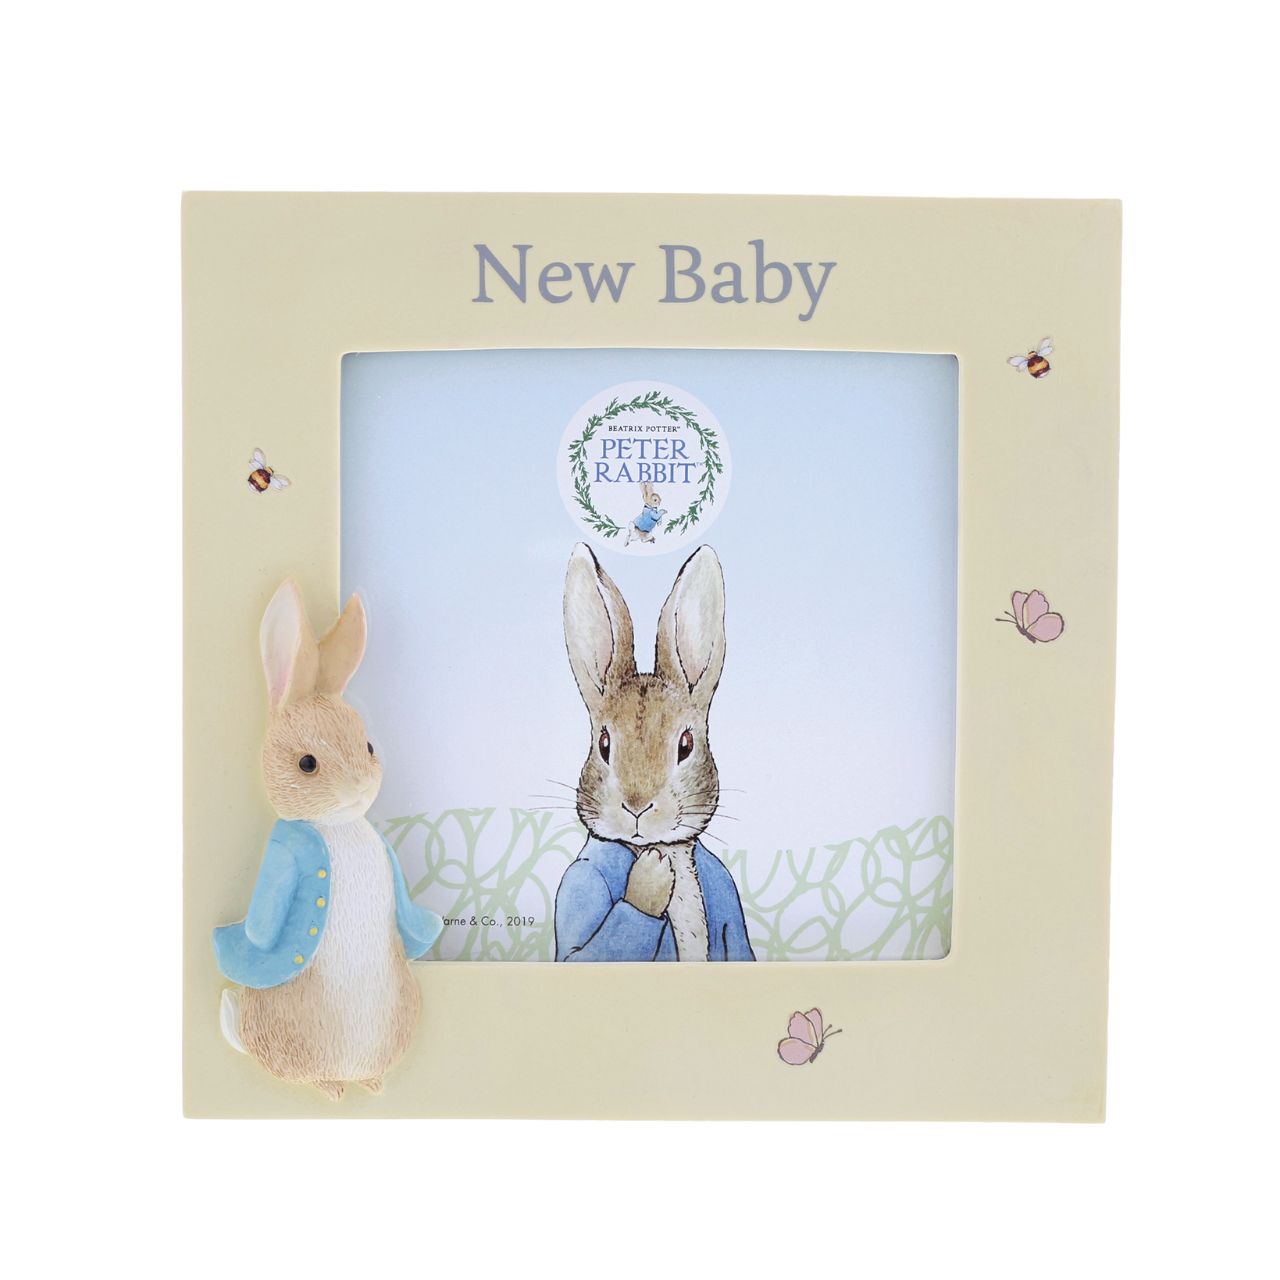 Peter Rabbit New Baby Photo Frame  Celebrate a new bundle of joy with this Peter Rabbit new baby photo frame, a perfect way to display a treasured photo. Complete with original illustrations from the Beatrix Potter stories. Photo frame fits square sized photos.